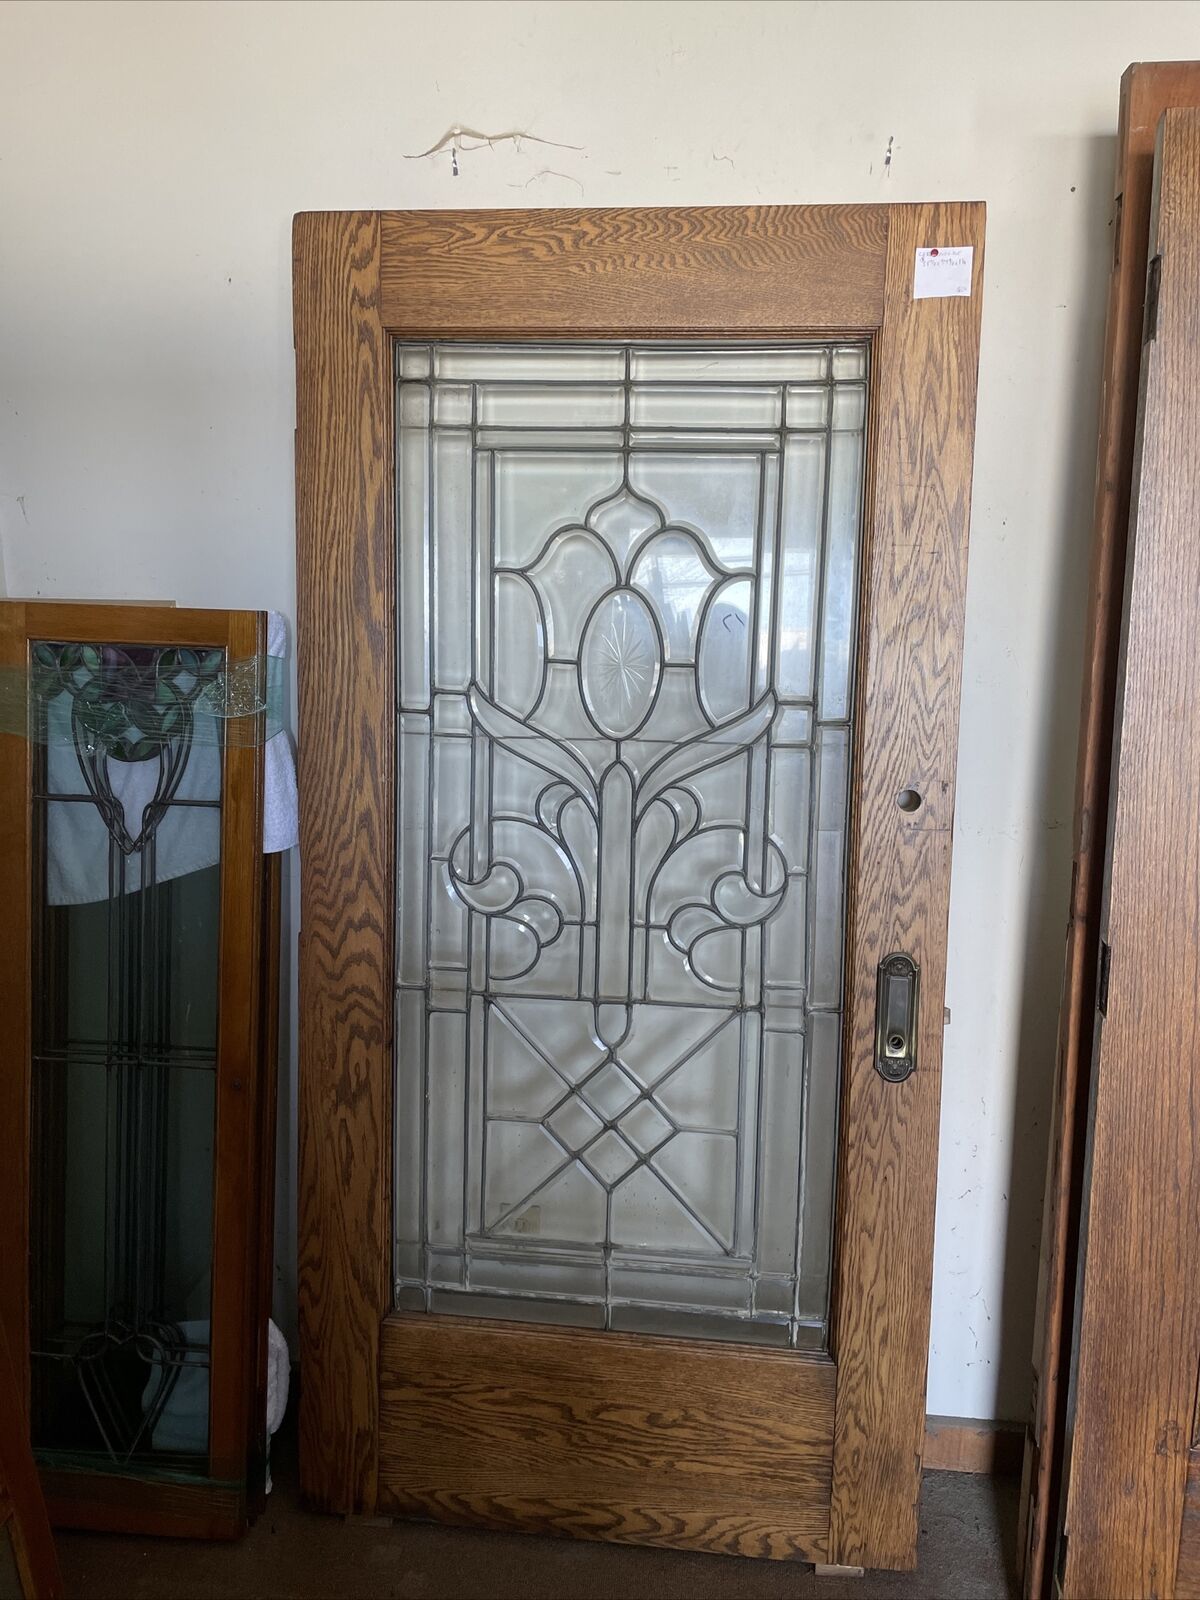 CR 15 Antique Leaded Beveled Glass entrance door refinished 38 7/8 x 79 3/8 x1.7